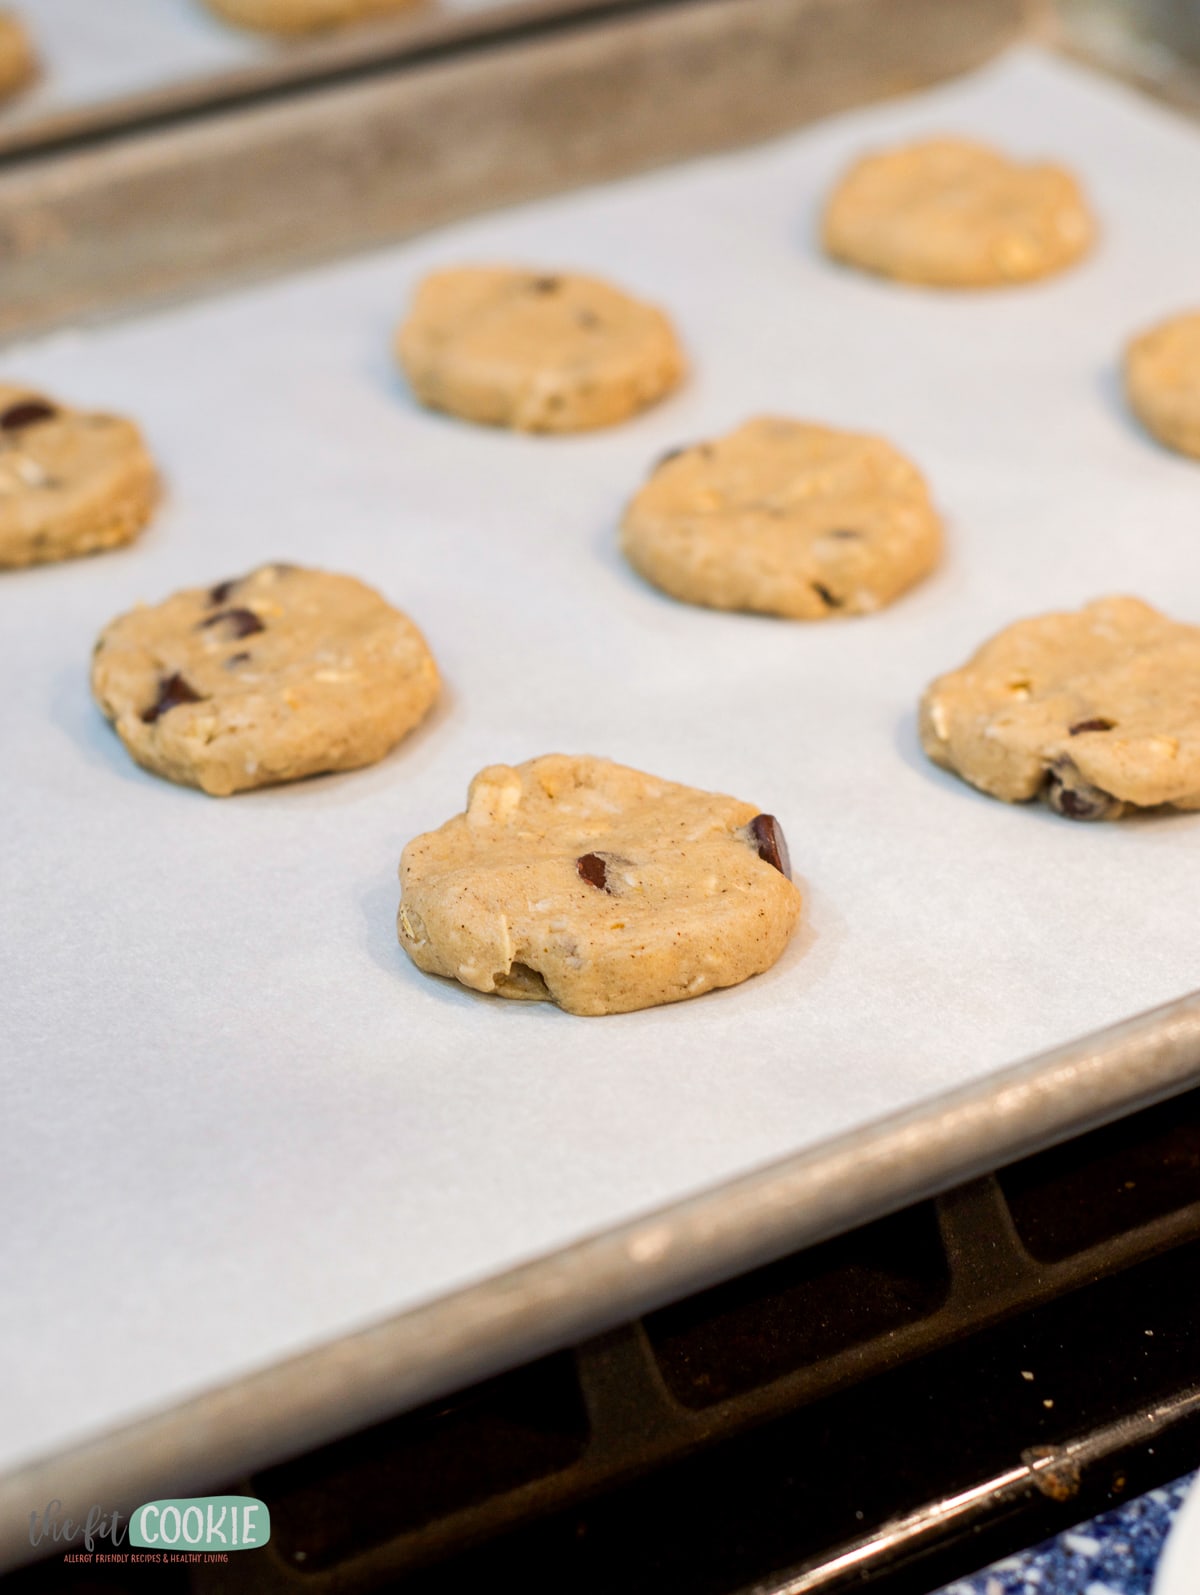 Chocolate chip cowboy cookie dough on a baking sheet.